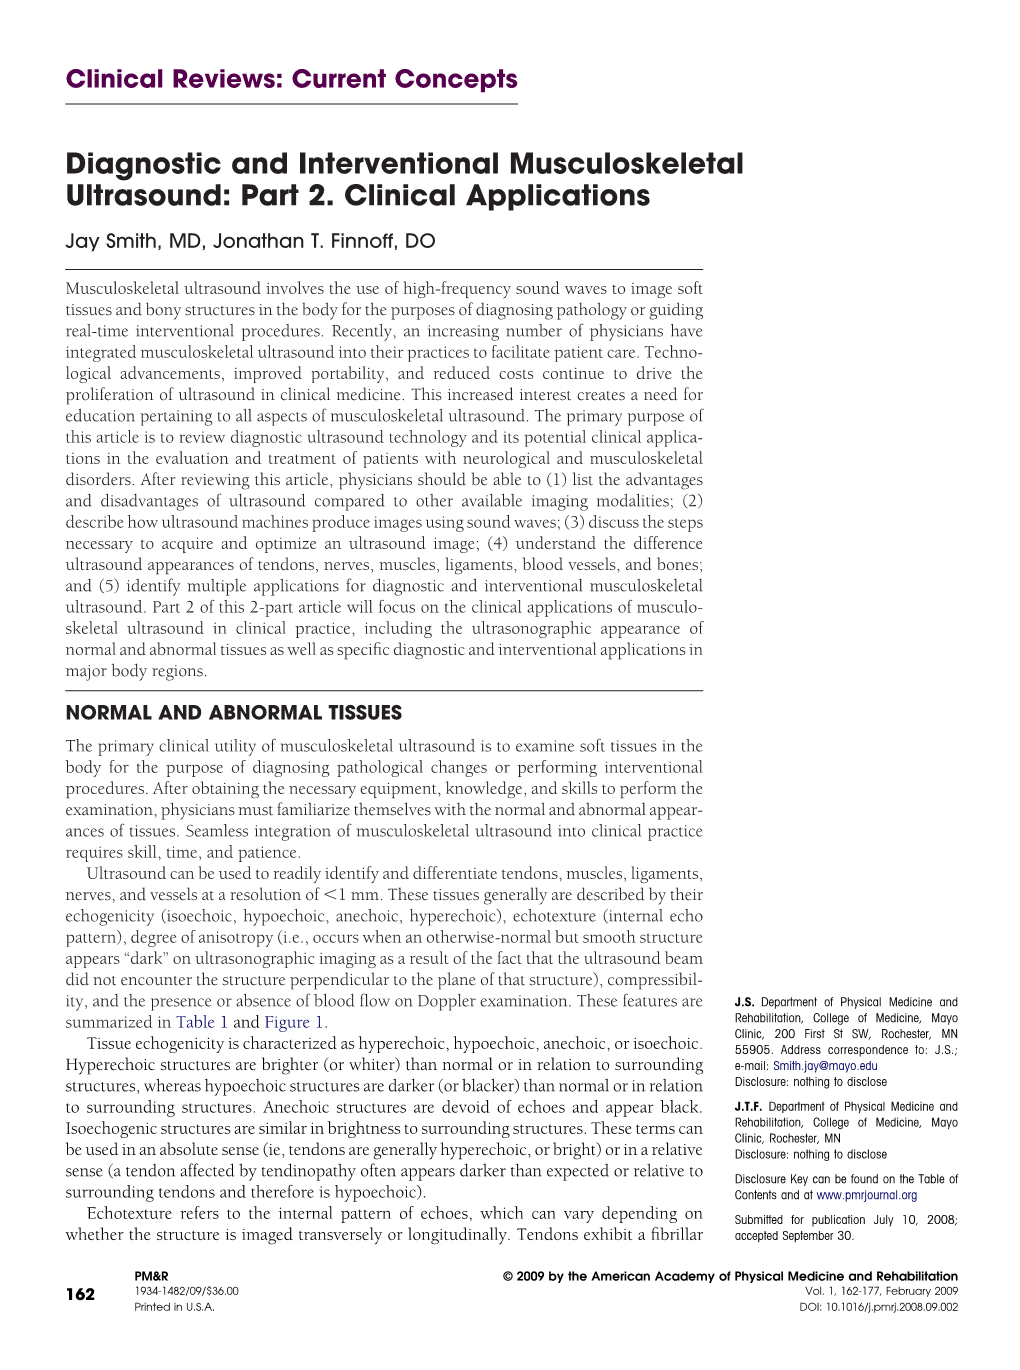 Diagnostic and Interventional Musculoskeletal Ultrasound: Part 2